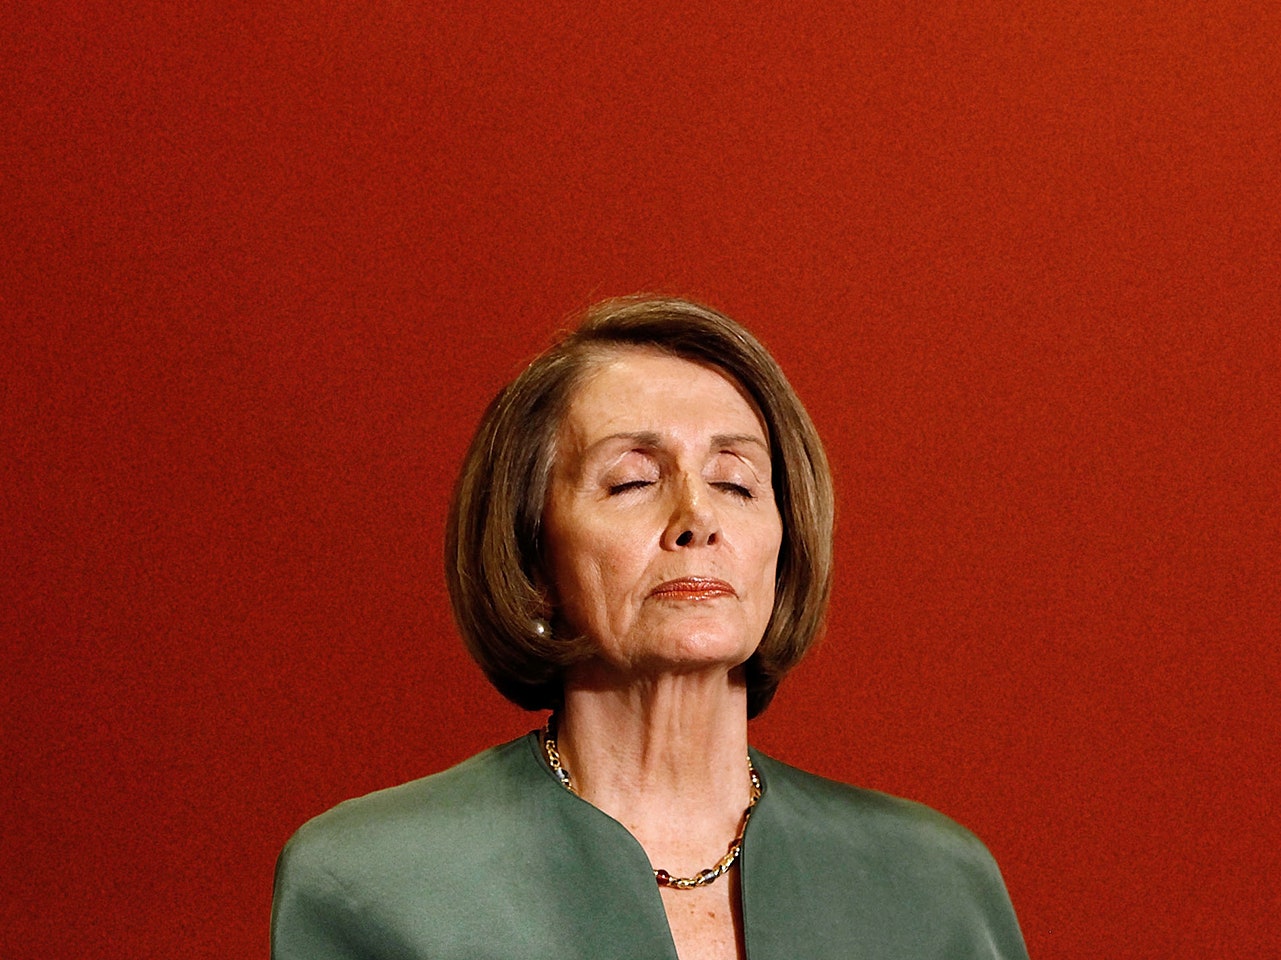 If Nancy Pelosi Wants to Uphold Her Legacy, She Should Impeach Trump